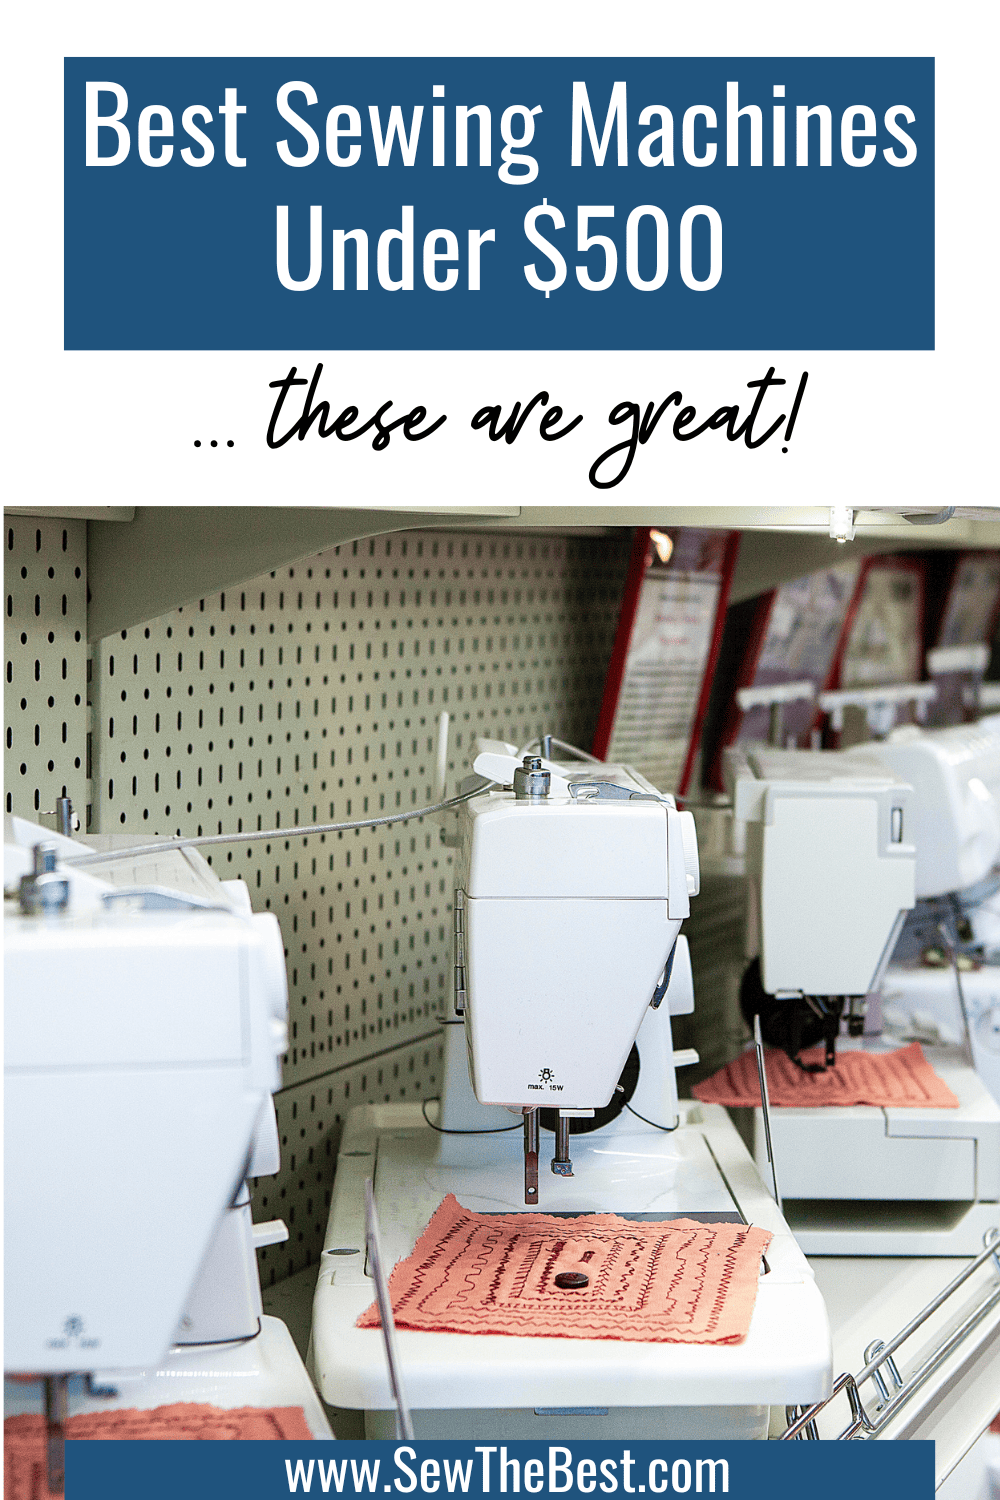 Best Sewing Machines Under $500 ... these are great! Picture of sewing machines on a store shelf follows.